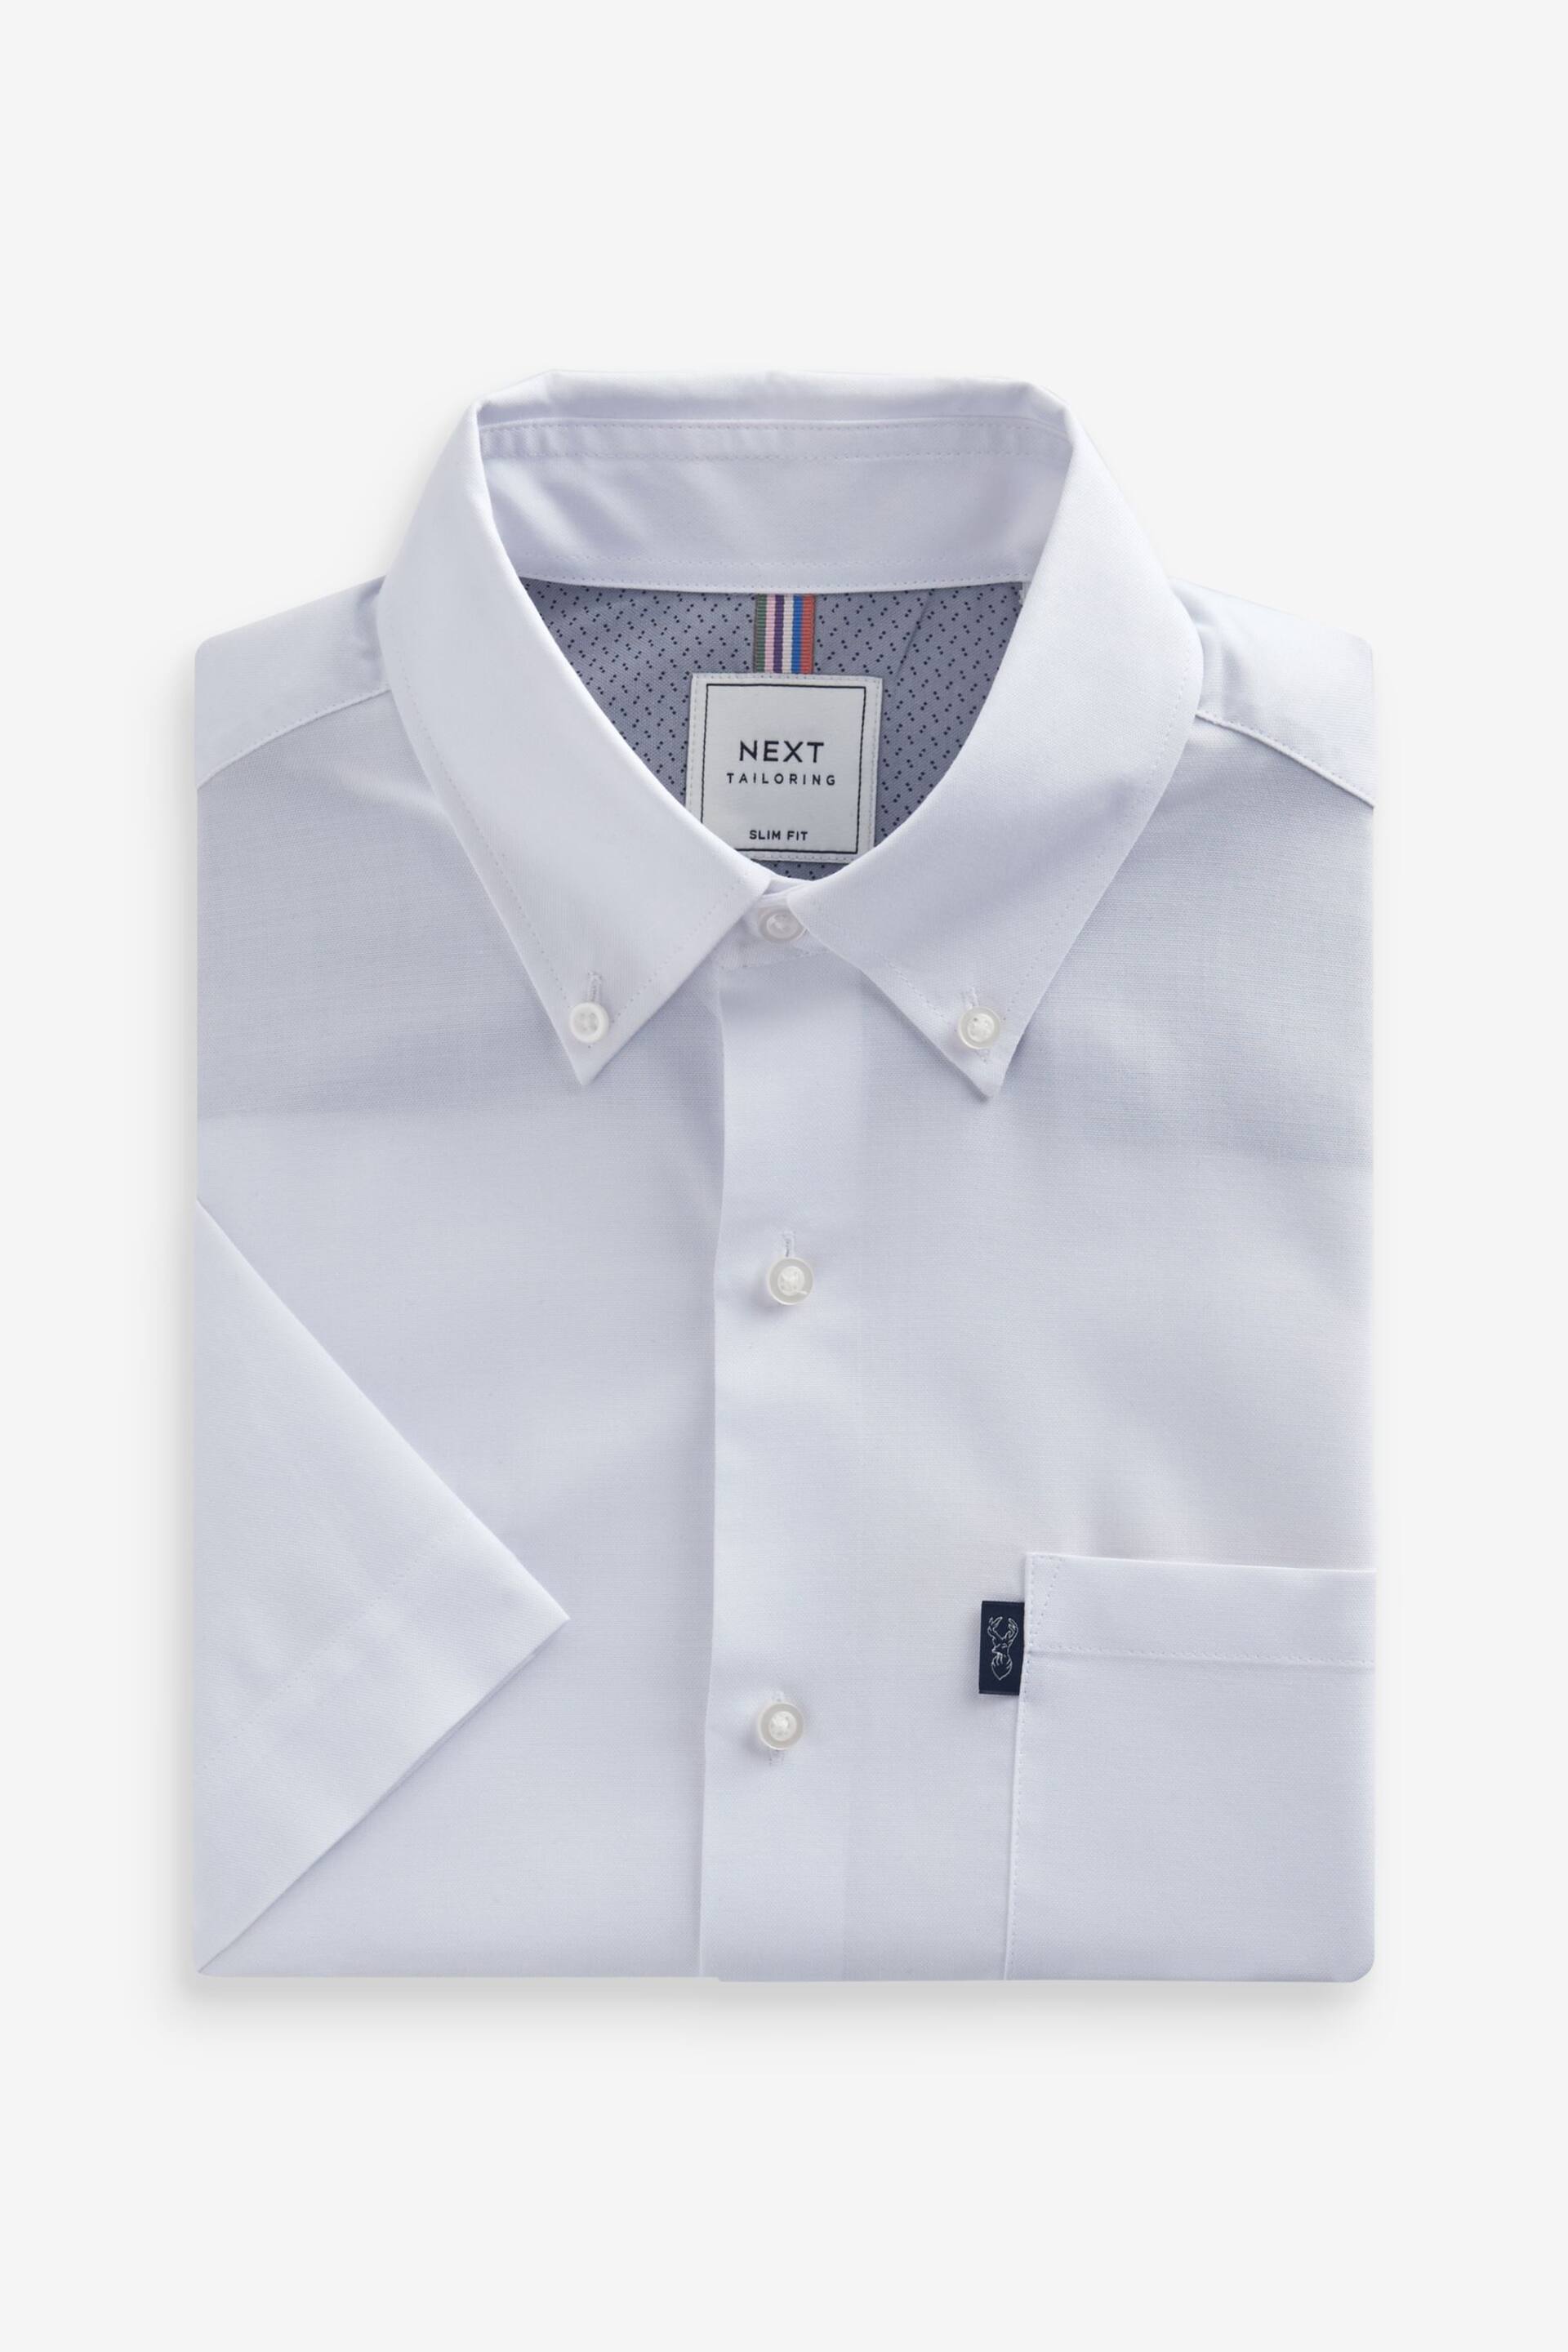 White Slim Fit Short Sleeve Easy Iron Button Down Oxford Shirt - Image 5 of 7